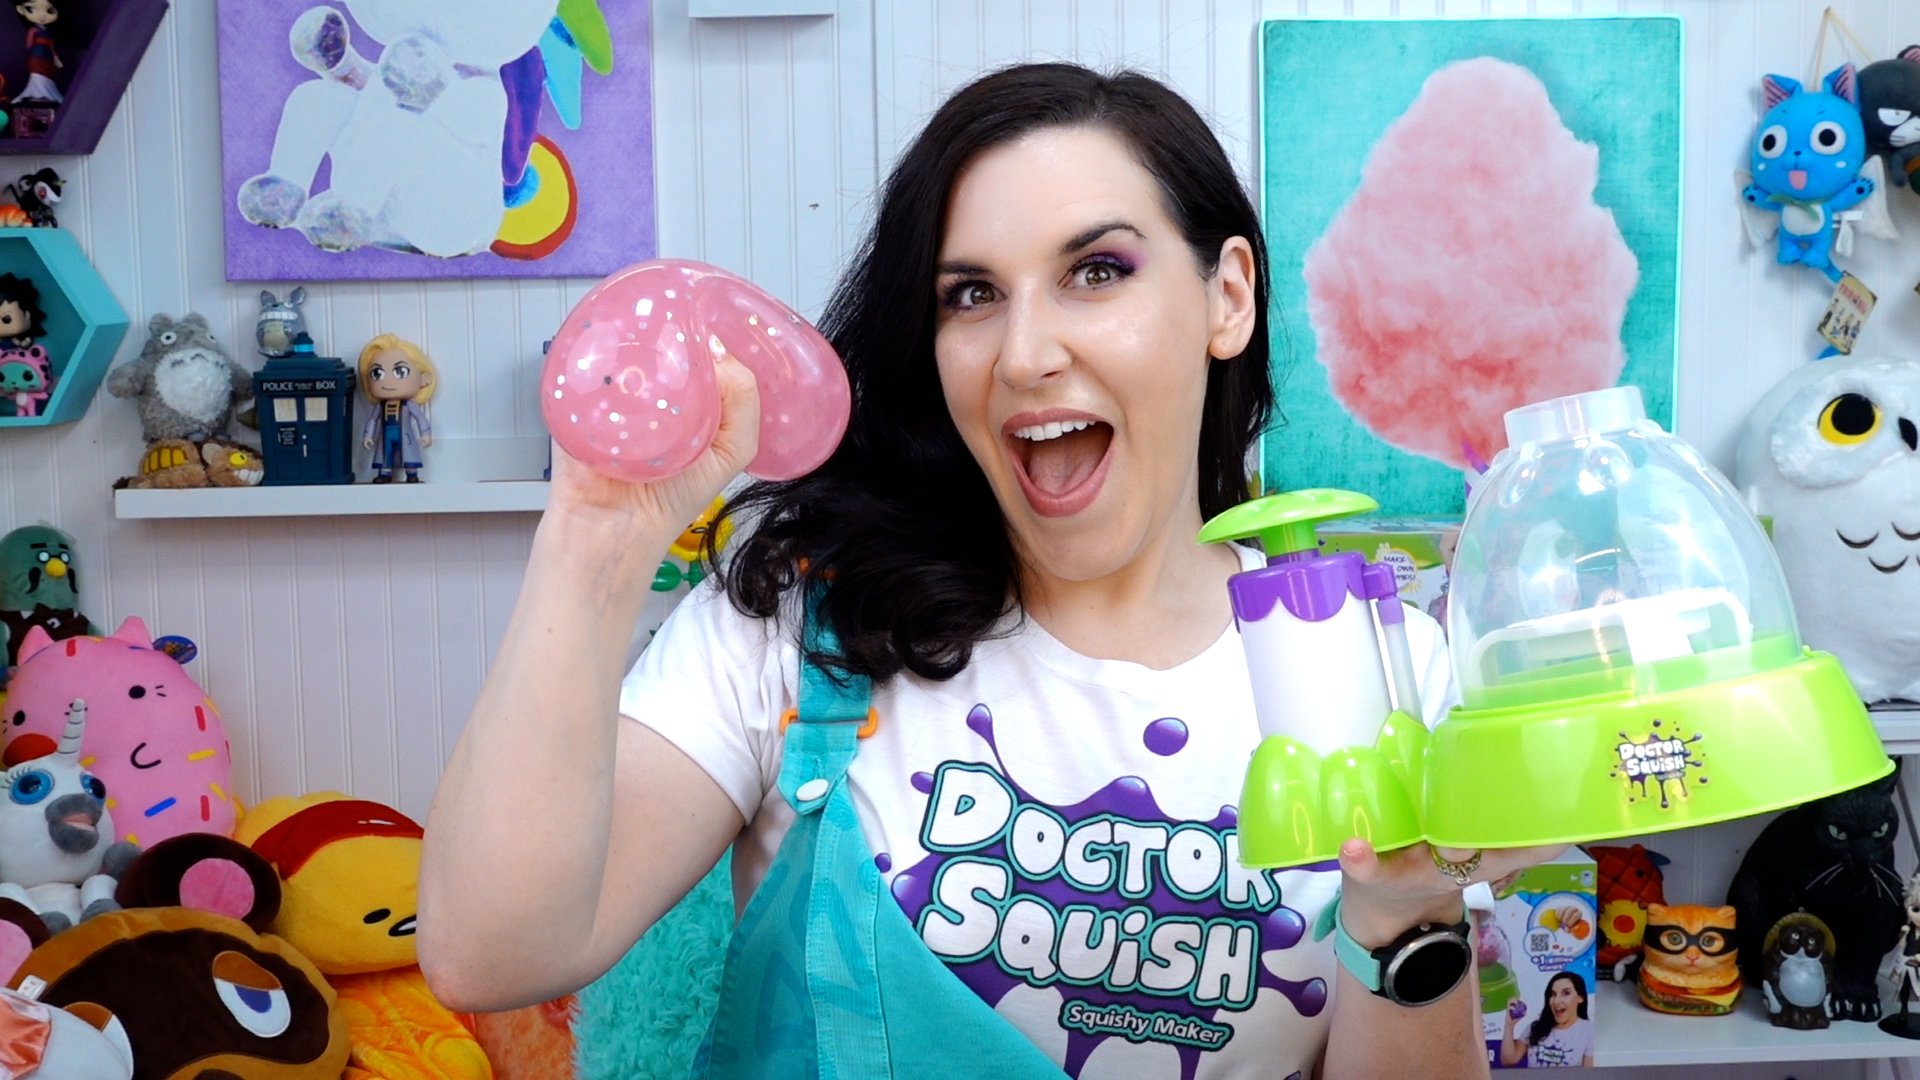 Let your child's creativity run wild with Doctor Squish Squishy Maker